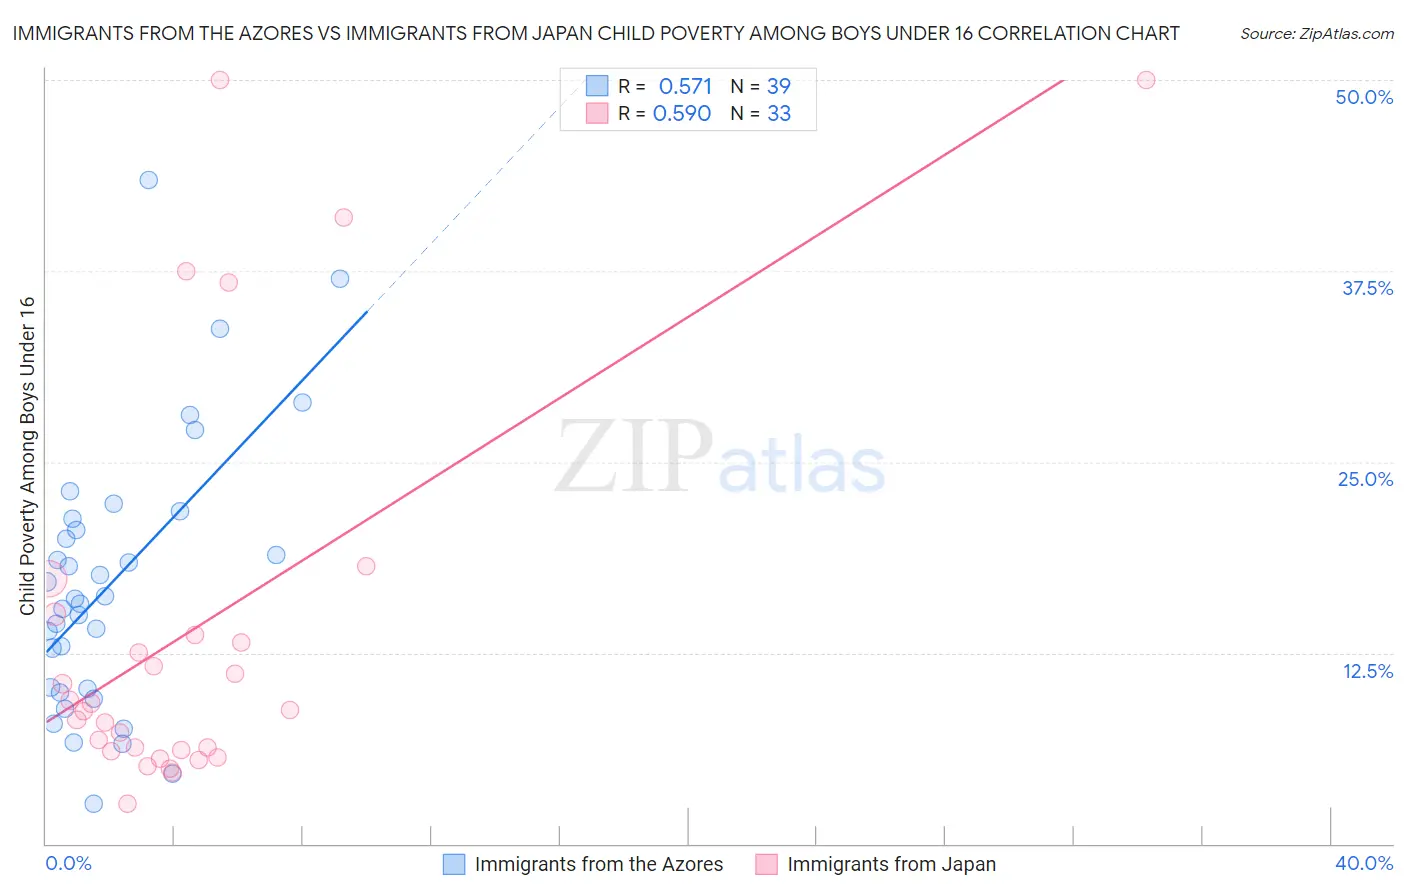 Immigrants from the Azores vs Immigrants from Japan Child Poverty Among Boys Under 16